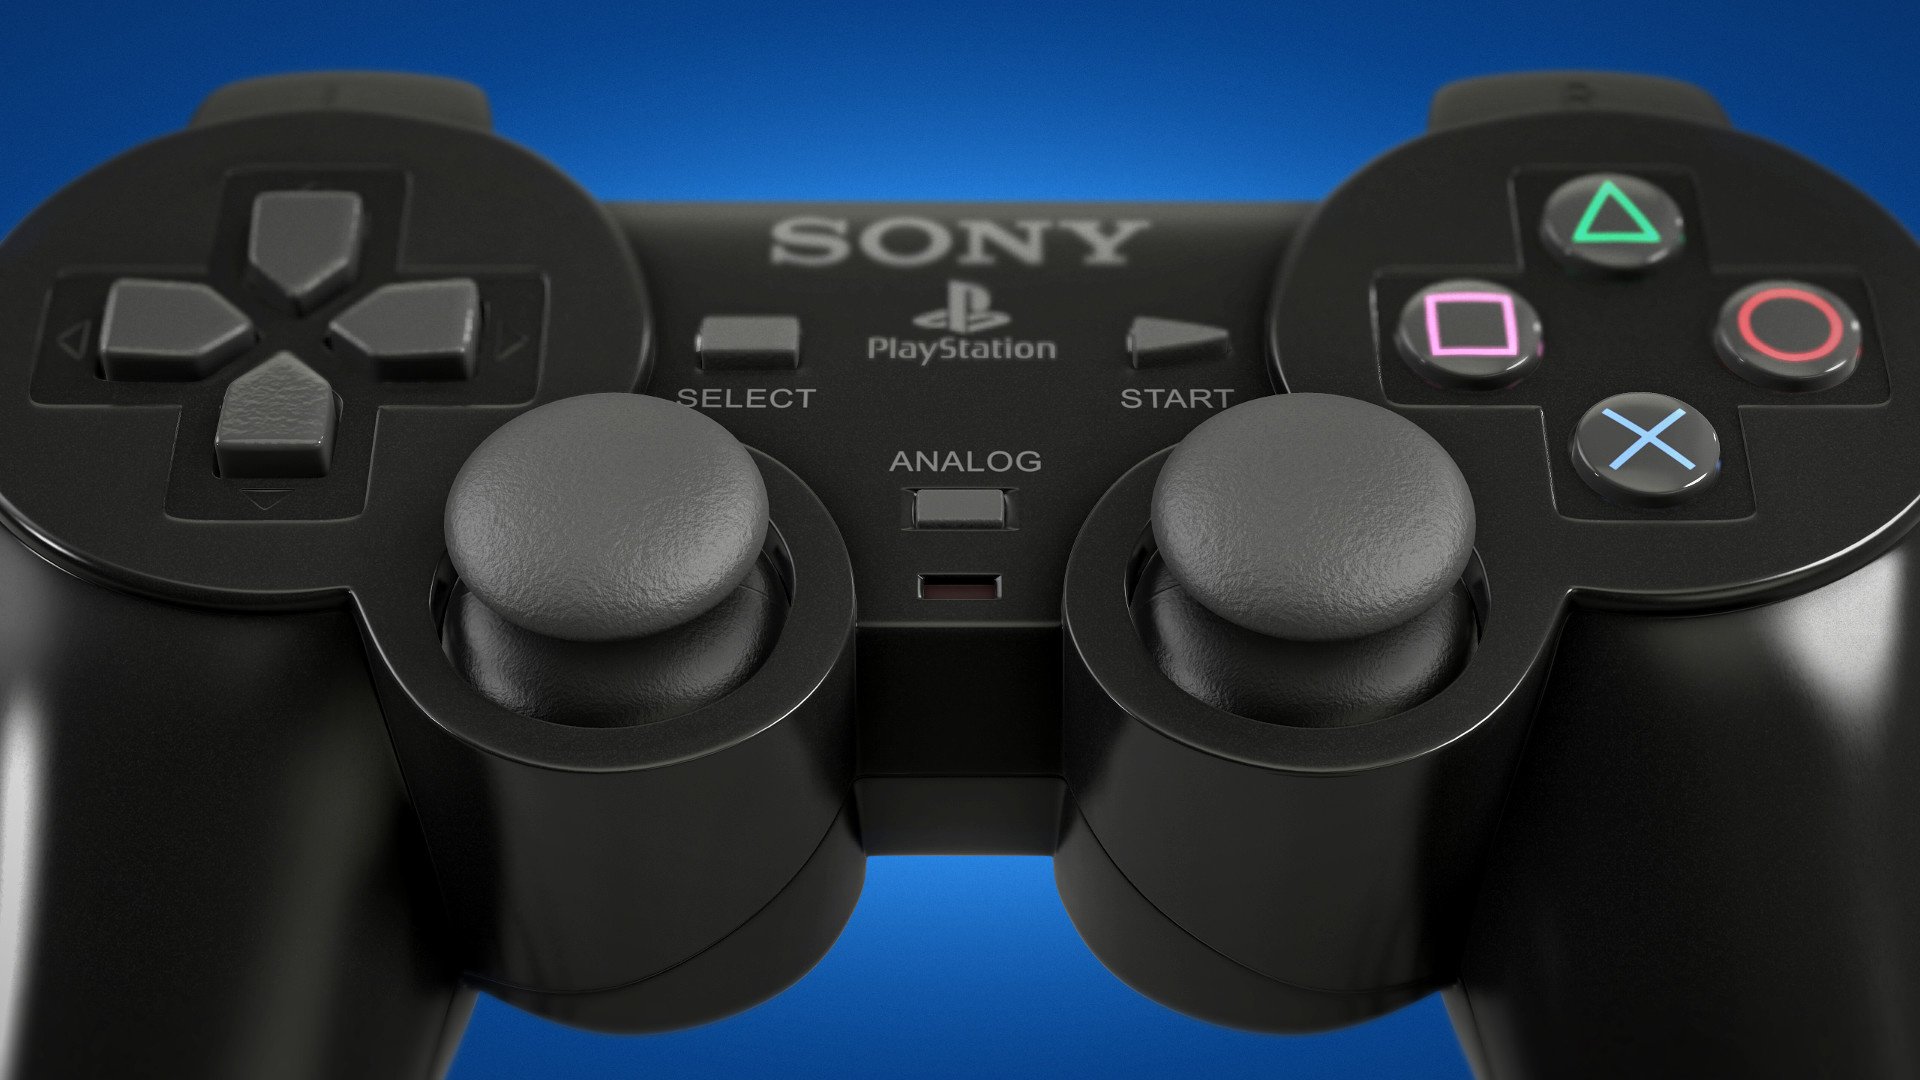 KNIGHT FANSCOTT GAMING BLOG: No, PS5 Backwards Compatibility with PS4 ...